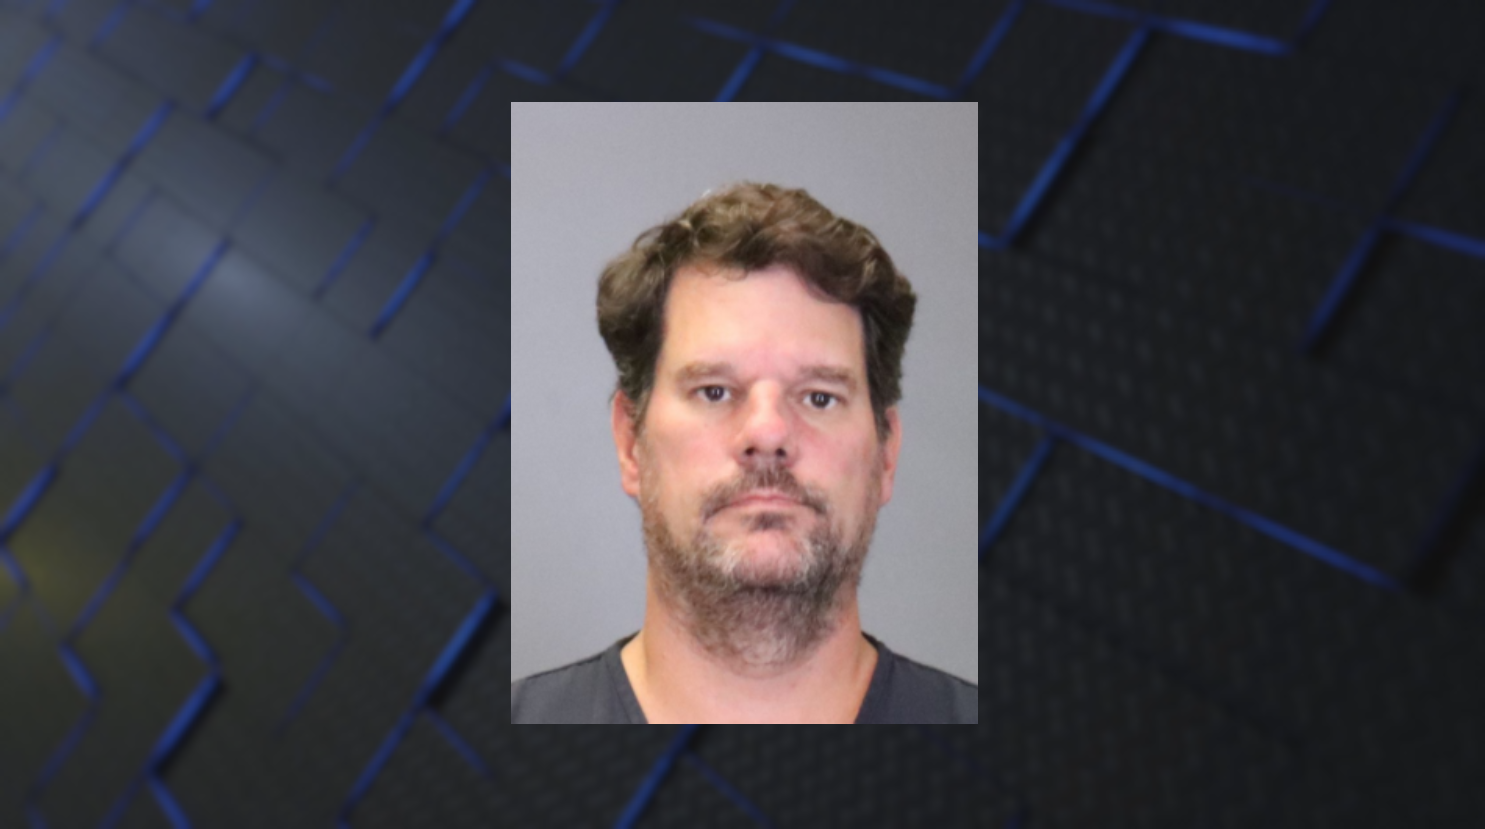 Columbus man charged with possession of child pornography after August GBI seizure